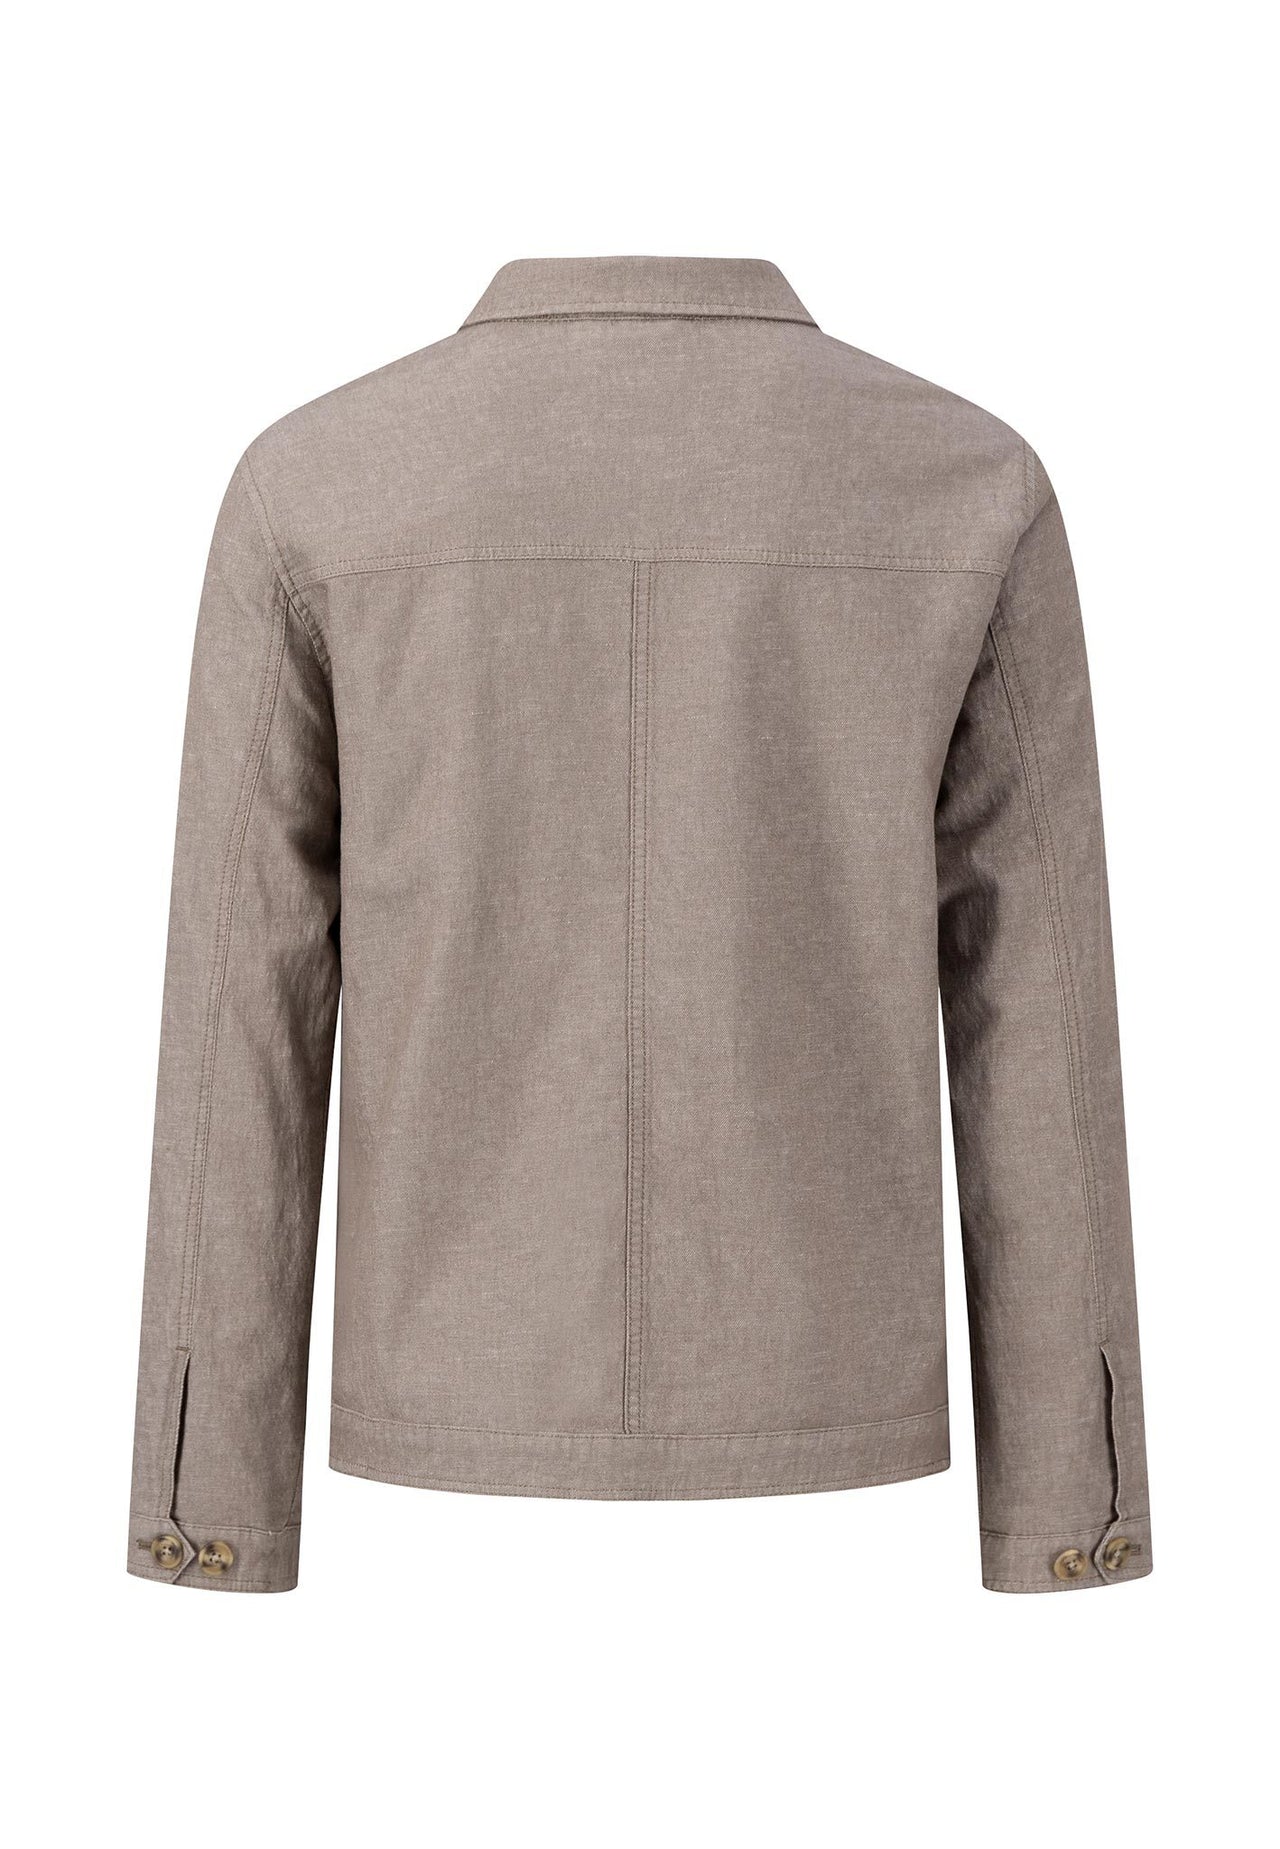 Fynch-Hatton Two Tone Structure Jacket - Dusty Olive